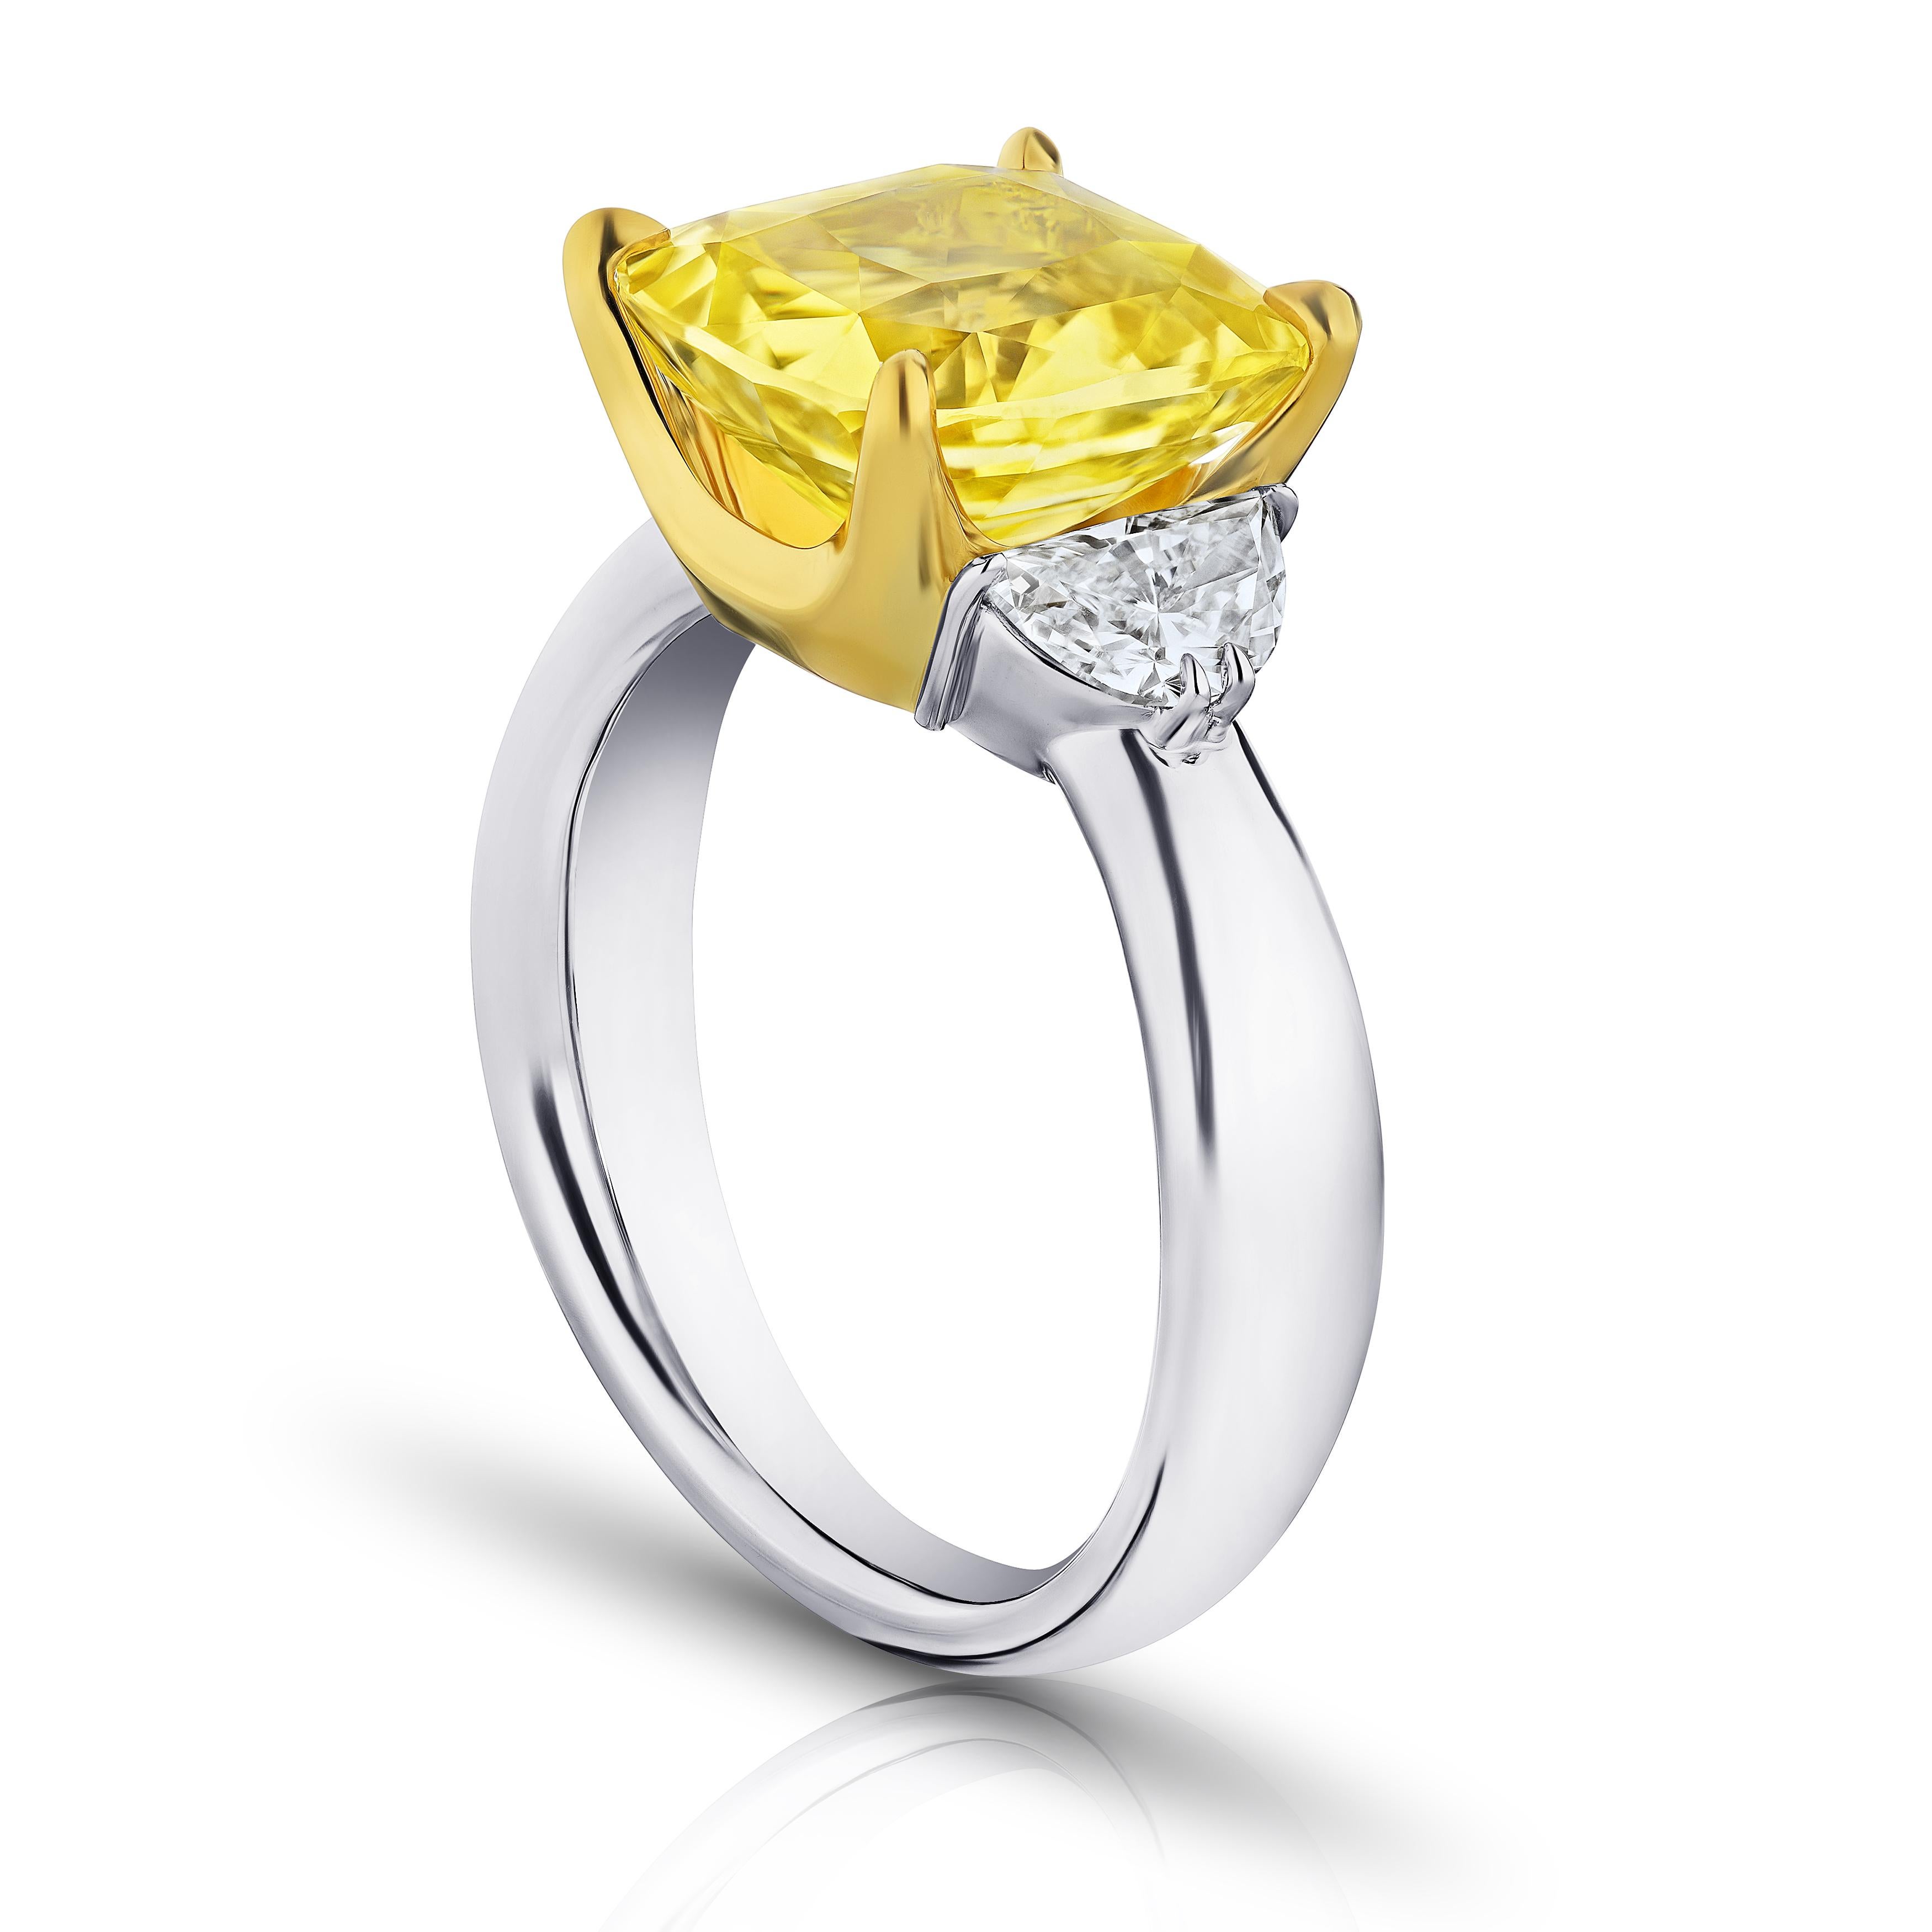 6.51 carat cushion yellow sapphire with half moon diamonds .80 carats set in a platinum with 18k yellow gold ring. Ring is currently a size 7. Resizing to your finger size is included.
